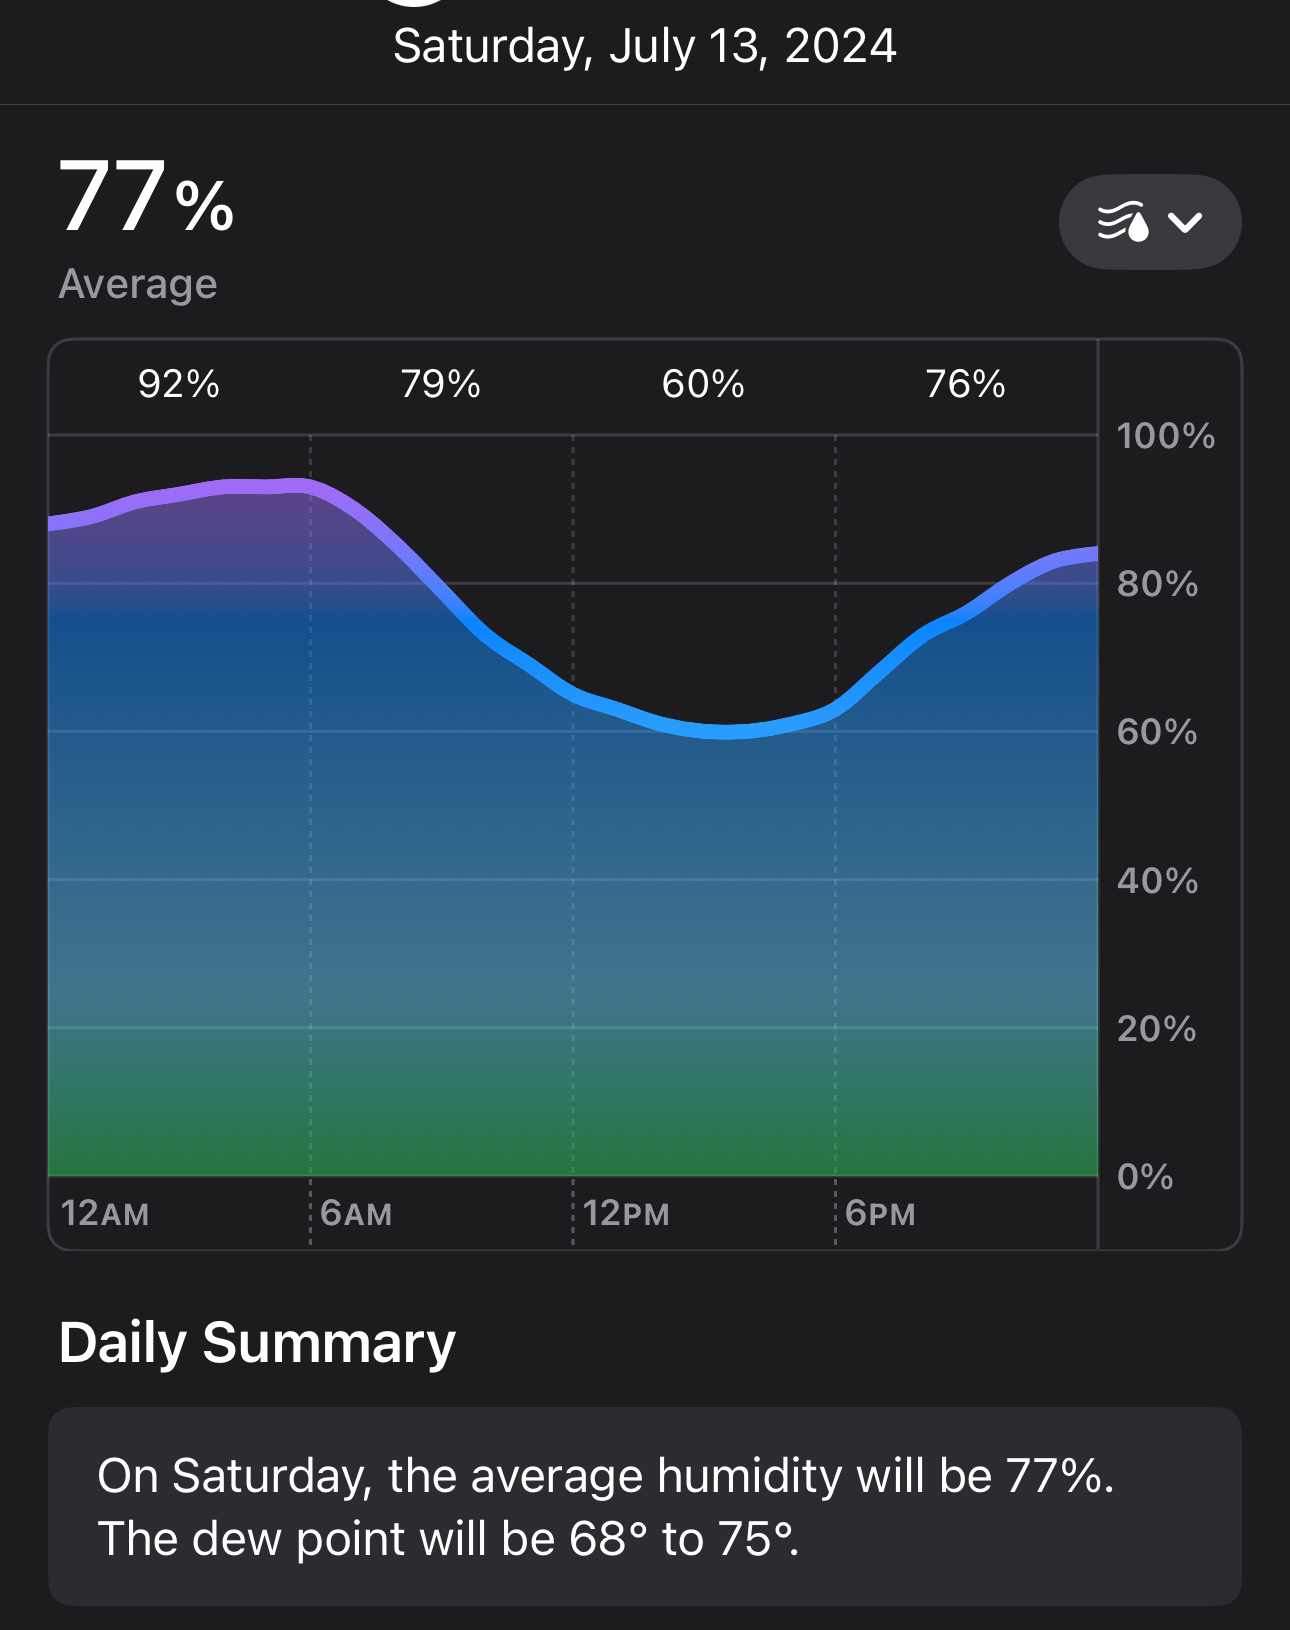 A weather graph indicates varying humidity percentages throughout the day, with detailed daily summary information provided below it.